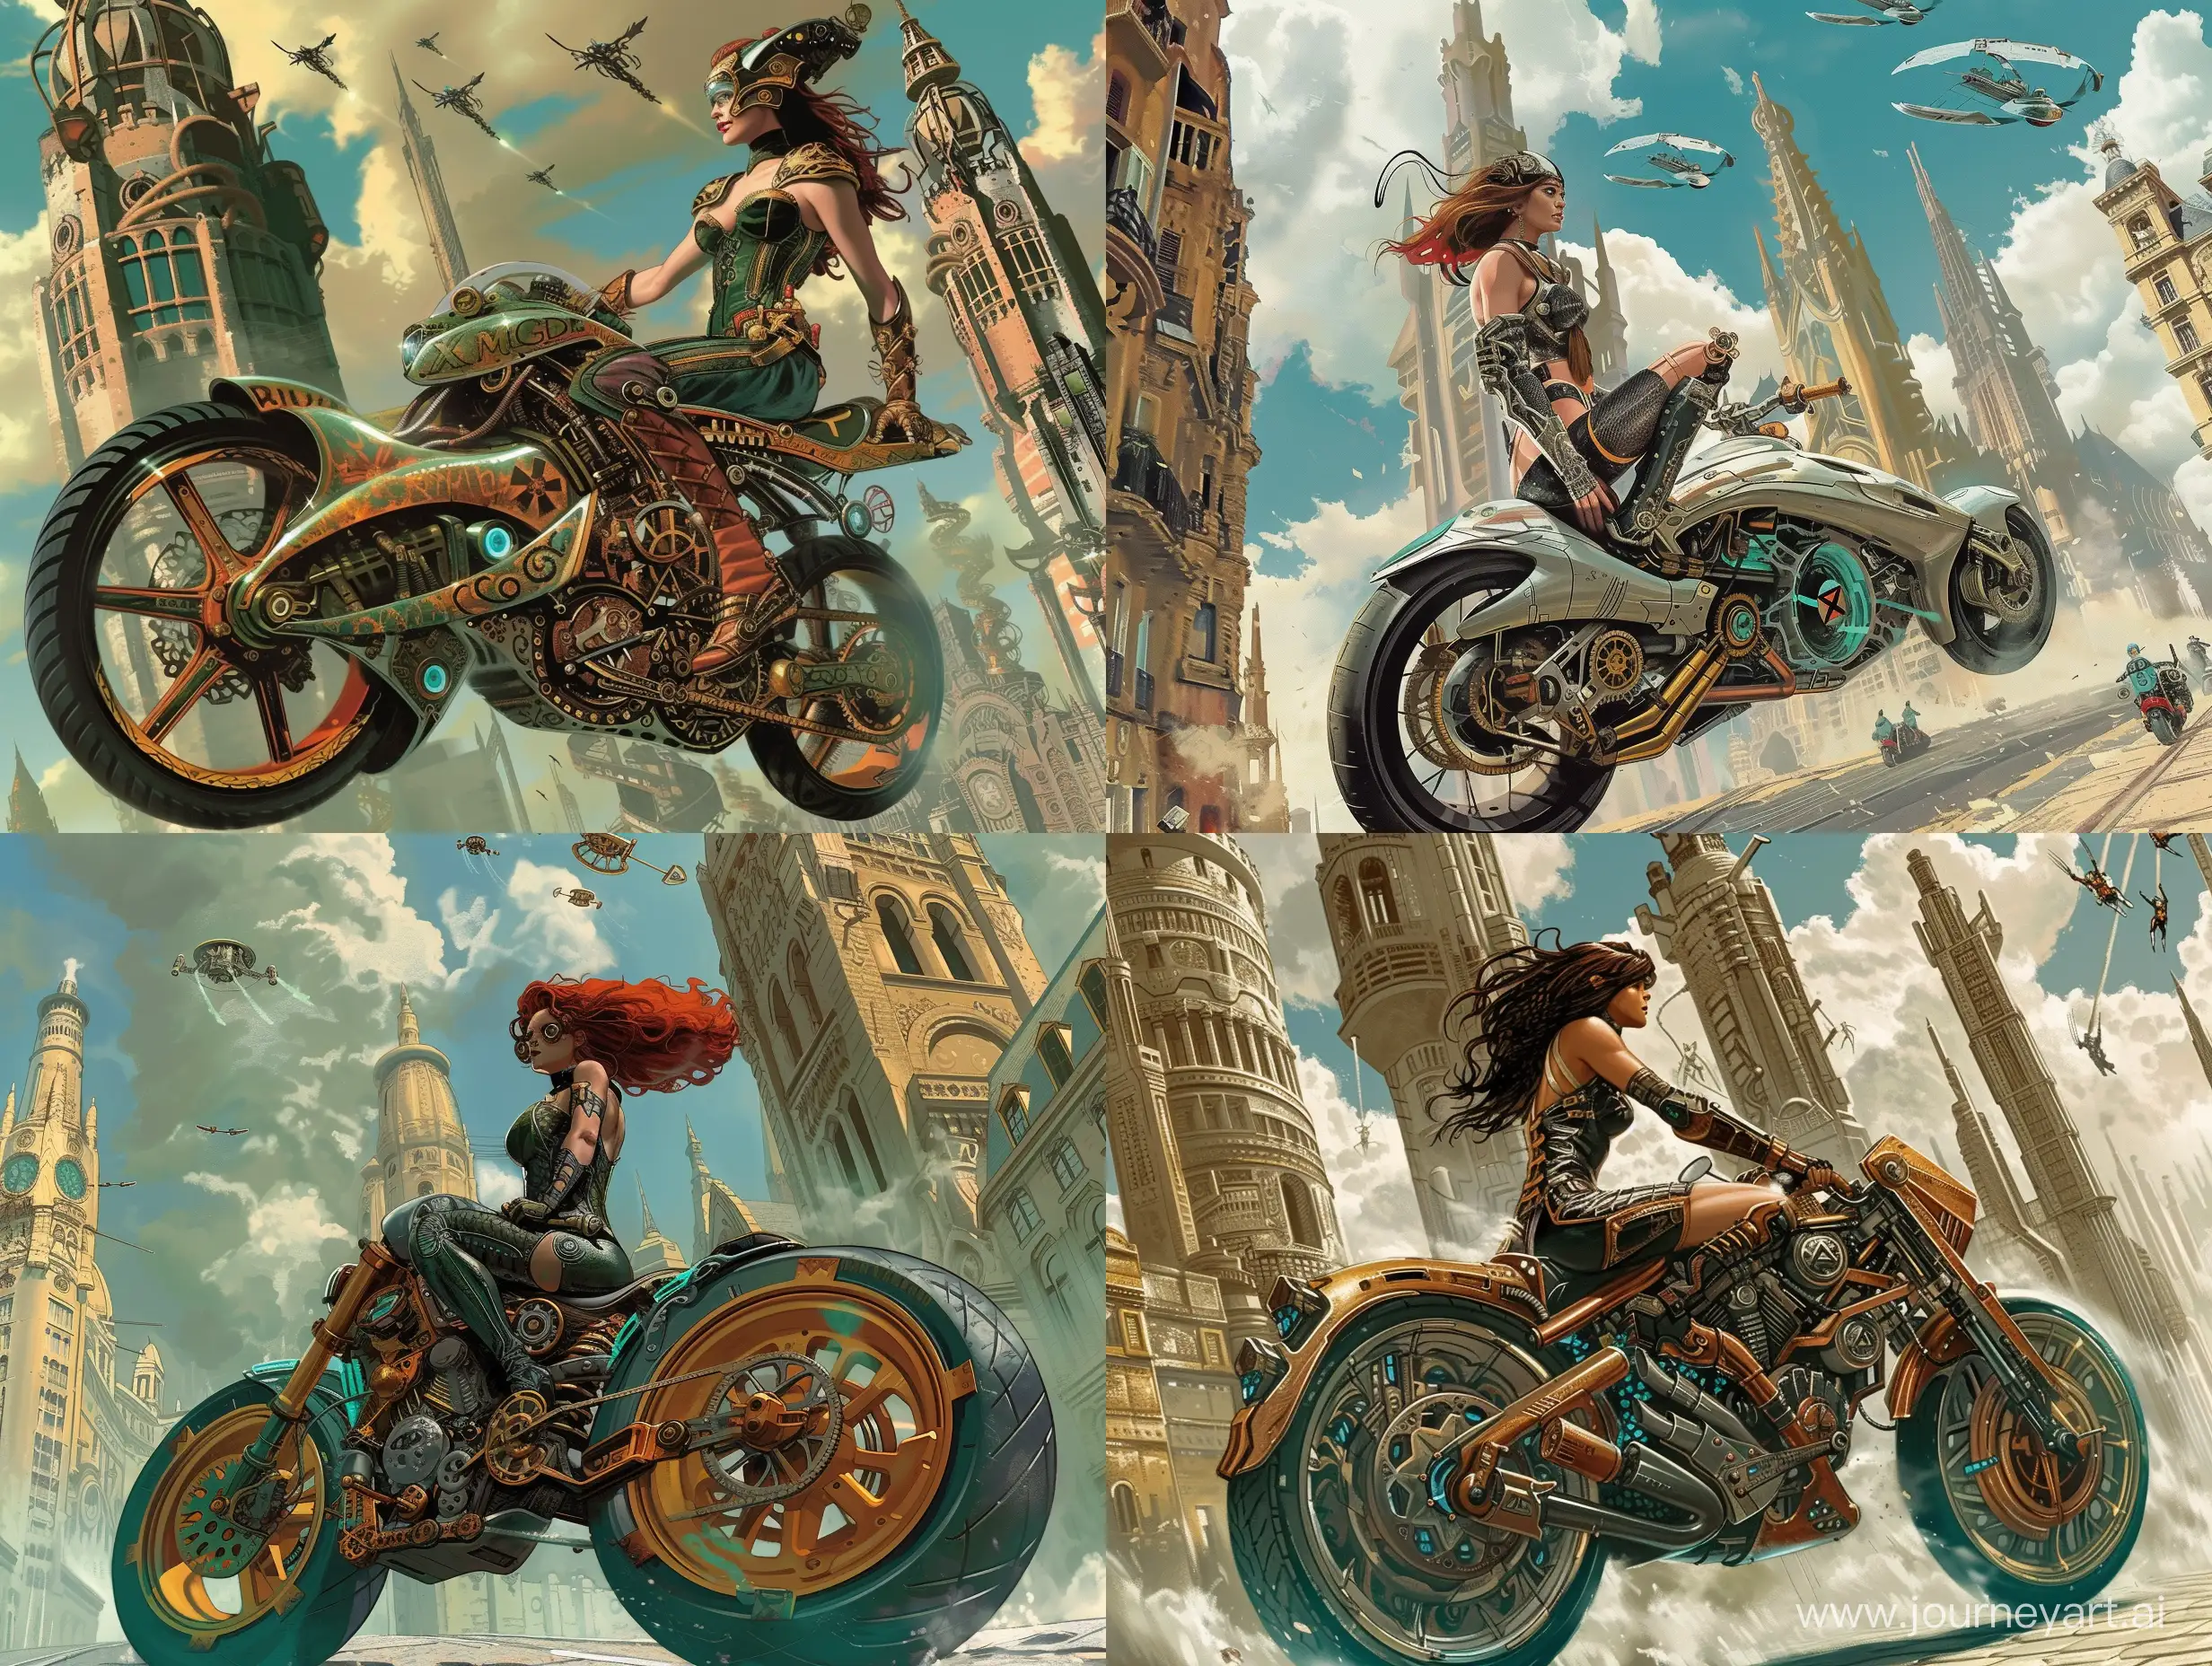 Women Amazon warrior with futuristic motorcycle in the steampunk style of the Victorian era state of street on big towers with magic mechanisms and laboratory devices, in sky flying derigibles, Luis Royo and Jim Lee style, features, ancient, highly detailed, complex, golden ratio composition, X-Men comic book cover